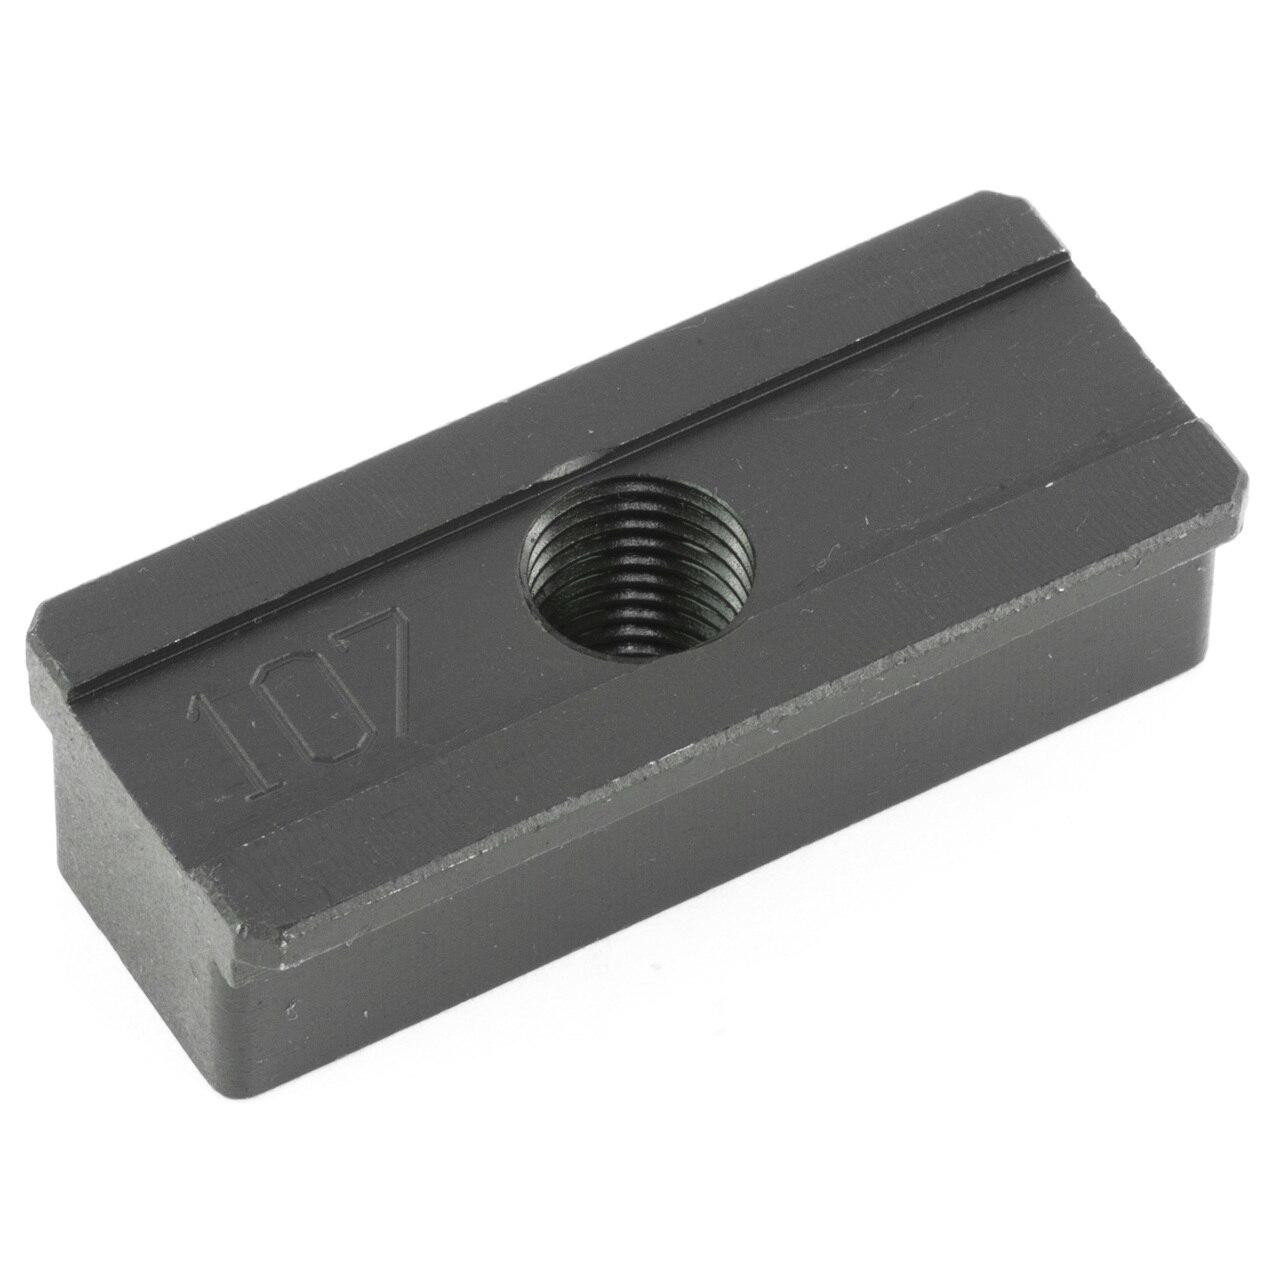 MGW Armory Mgw Shoe Plate For Sandw Gen3 9mm